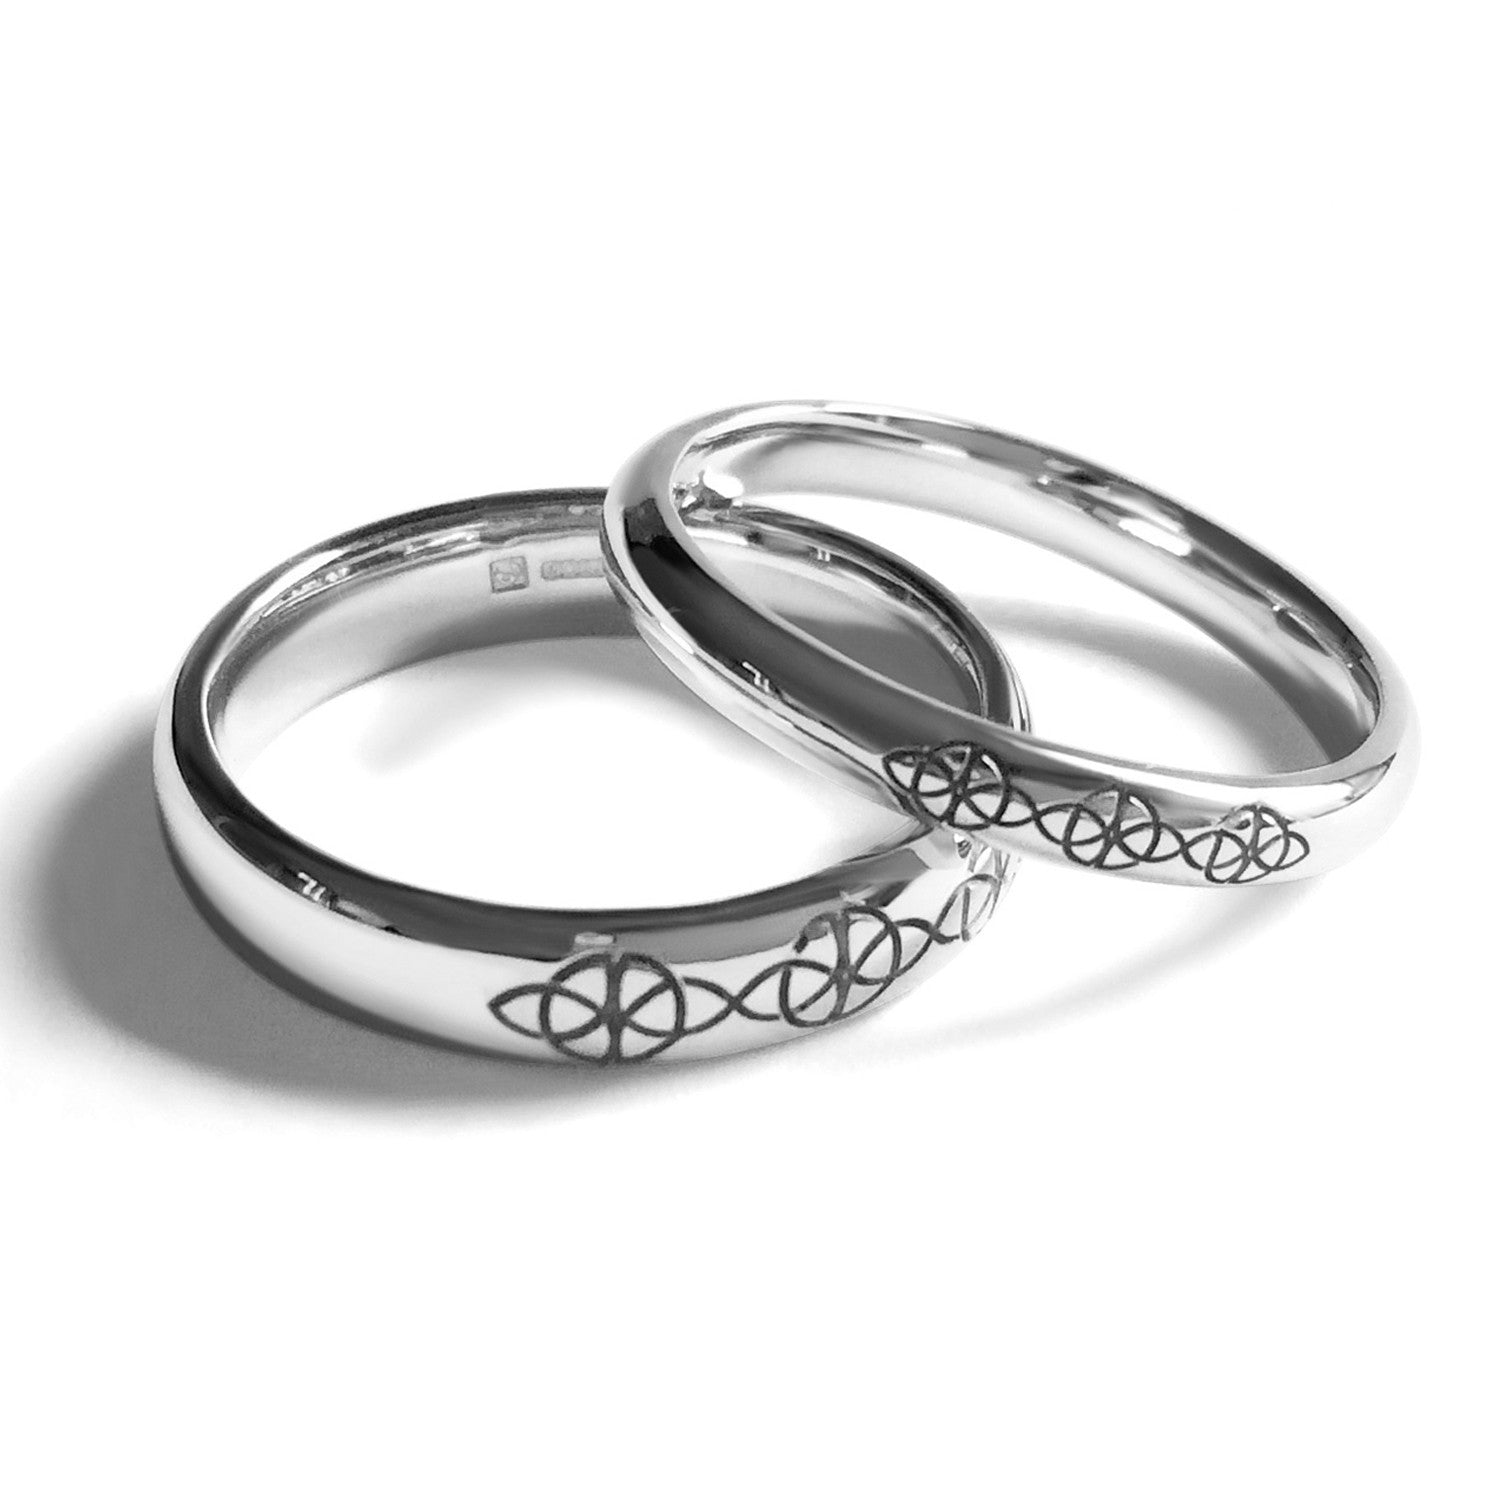 Bespoke wedding rings - Fairtrade white gold and unique laser-engravings